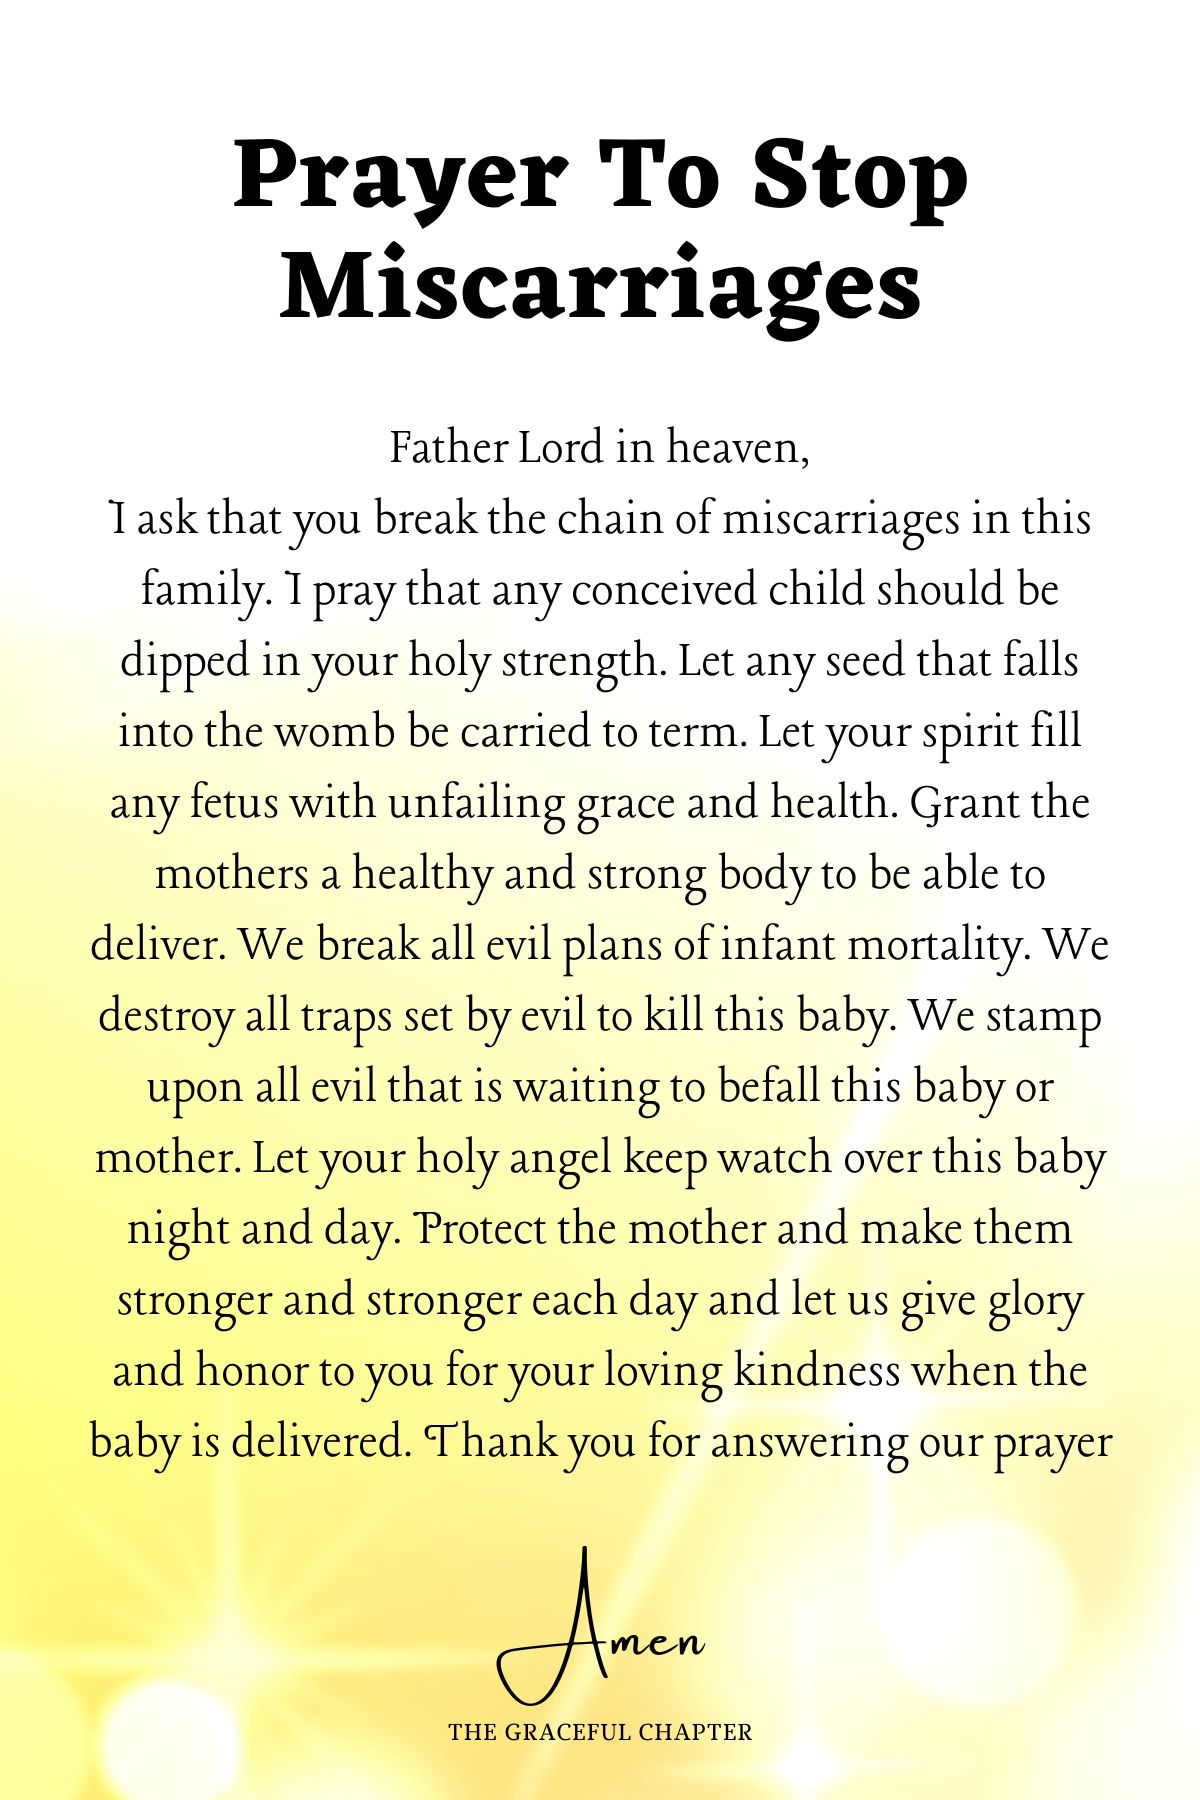 Prayer to stop miscarriages - Prayers For The Fruit Of The Womb